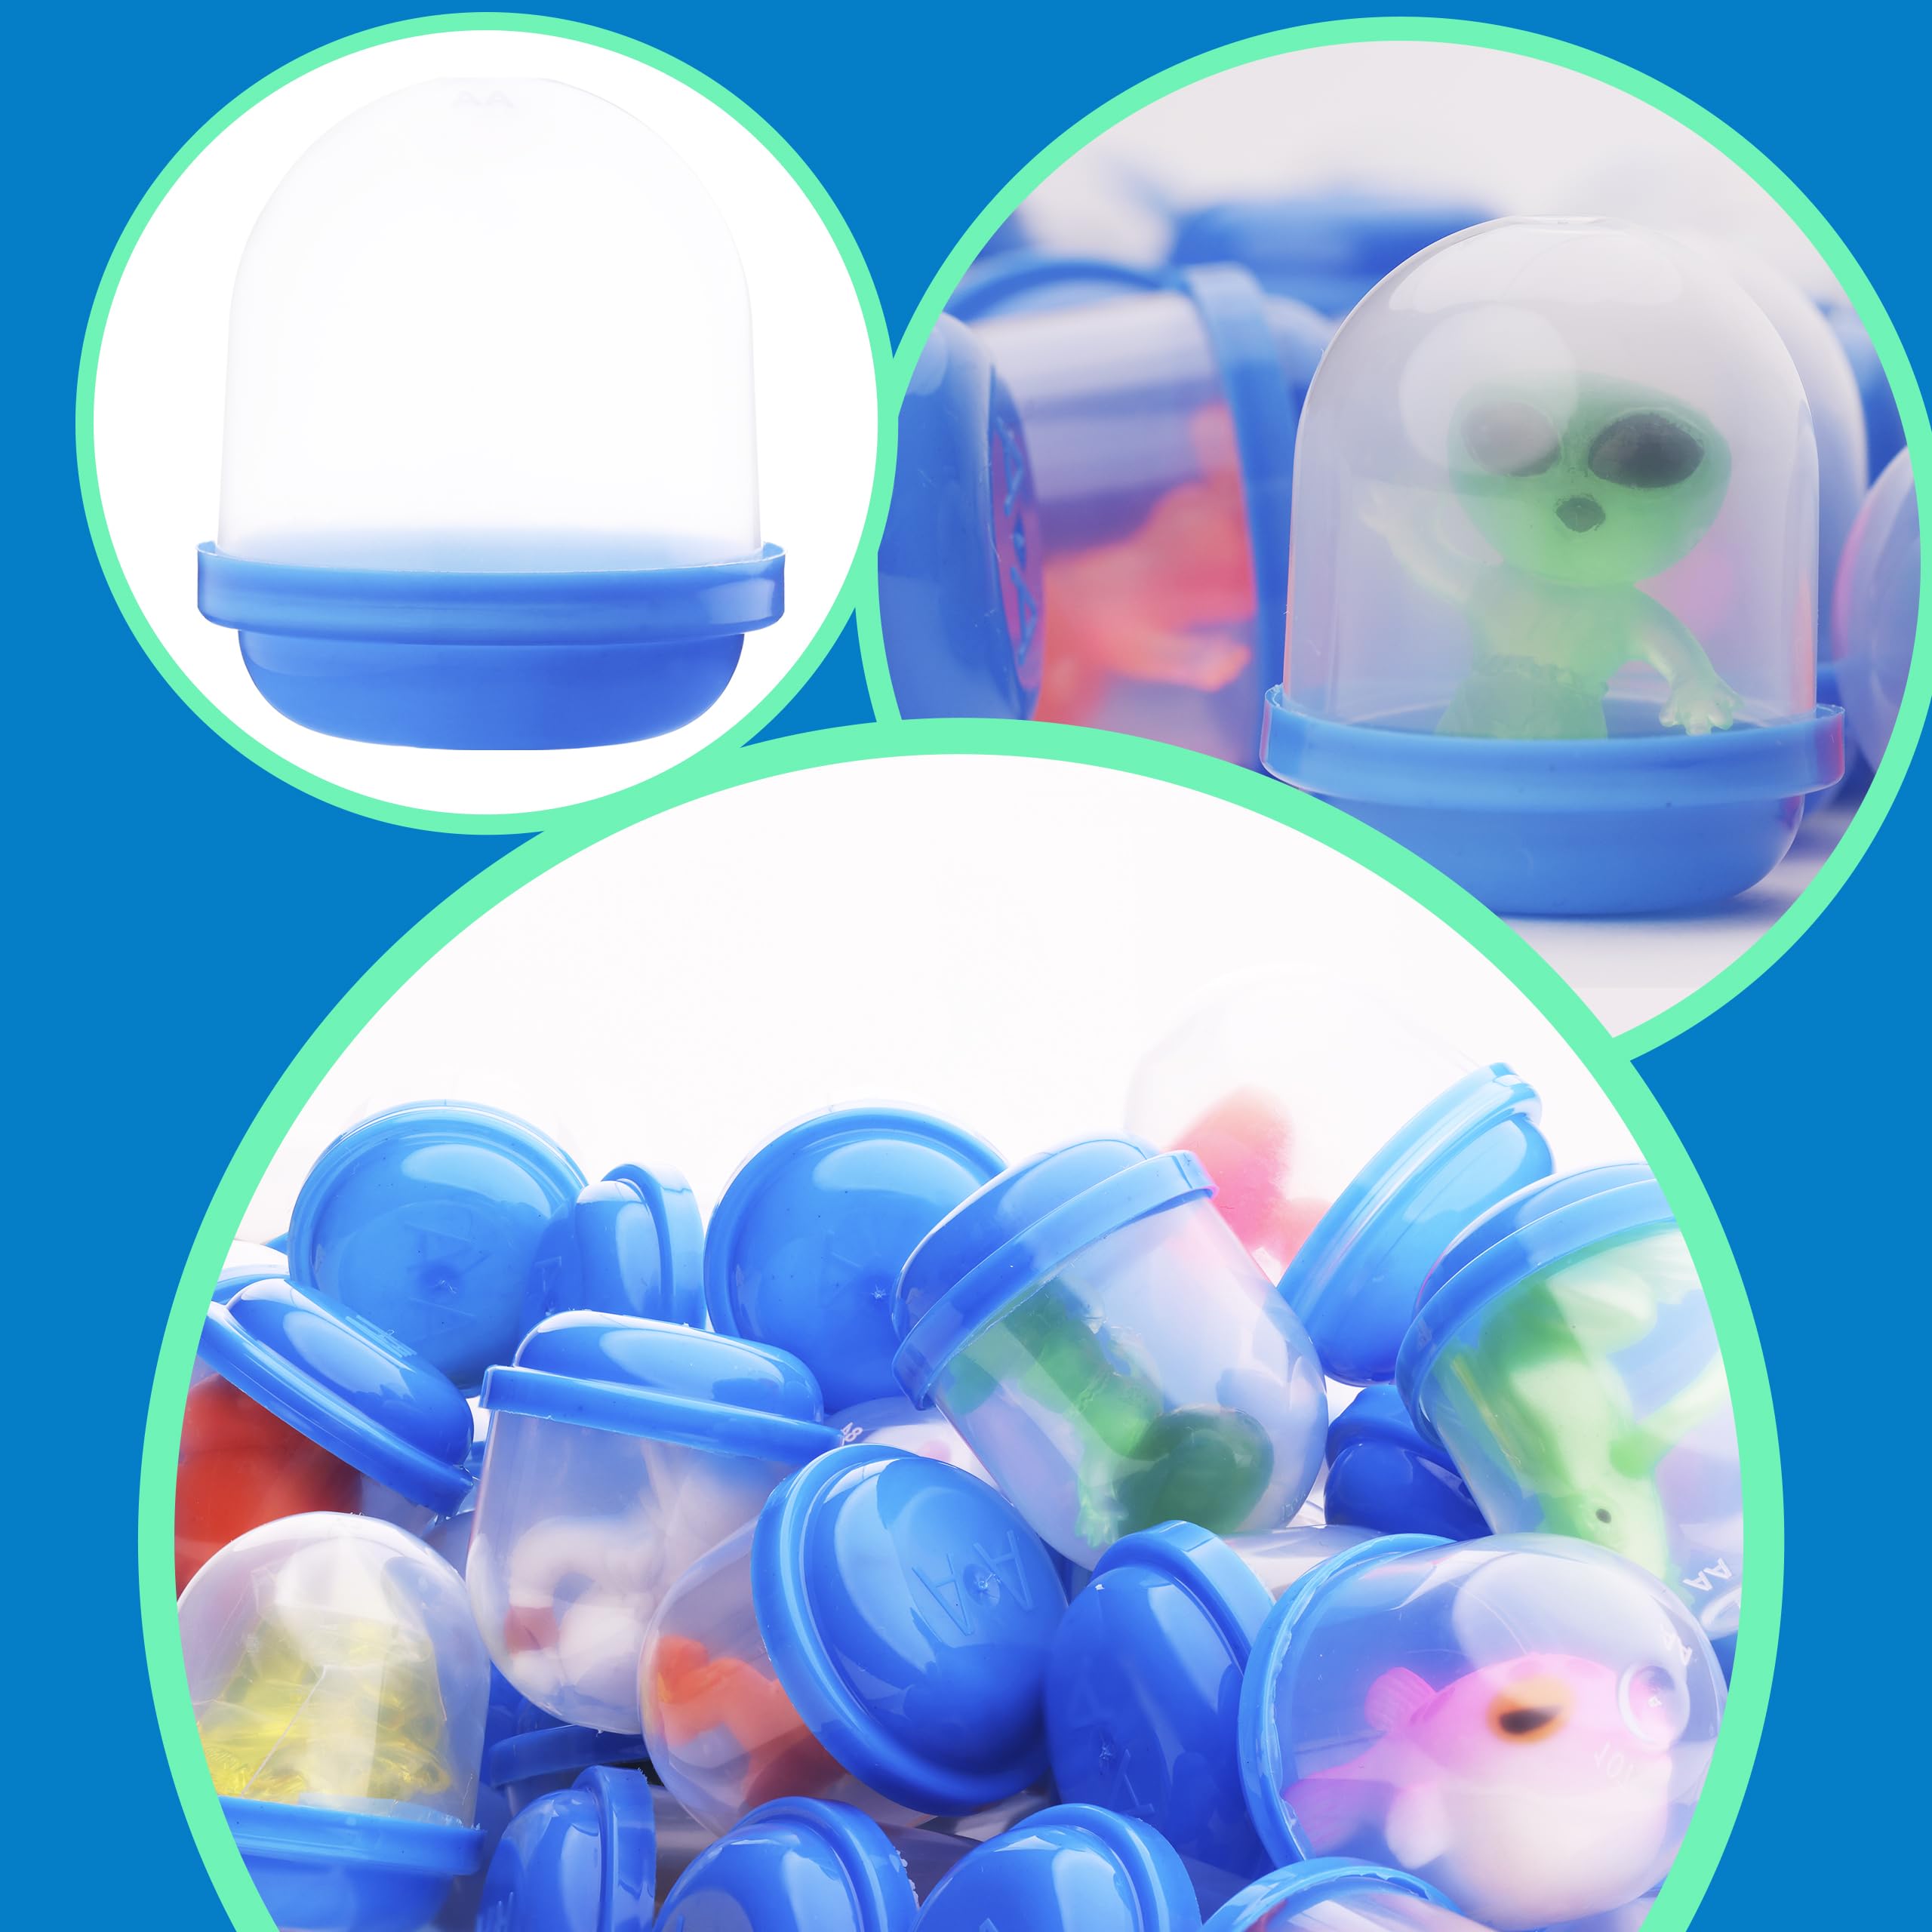 Vending Machine Capsules - 1.1 Inch Tiny Frosty Clear-Colored Acorn Capsules - 30 Pcs Empty Toy Capsules - Plastic Capsules for Toys - 28 mm Prize Machine Capsules - Small Colored Containers